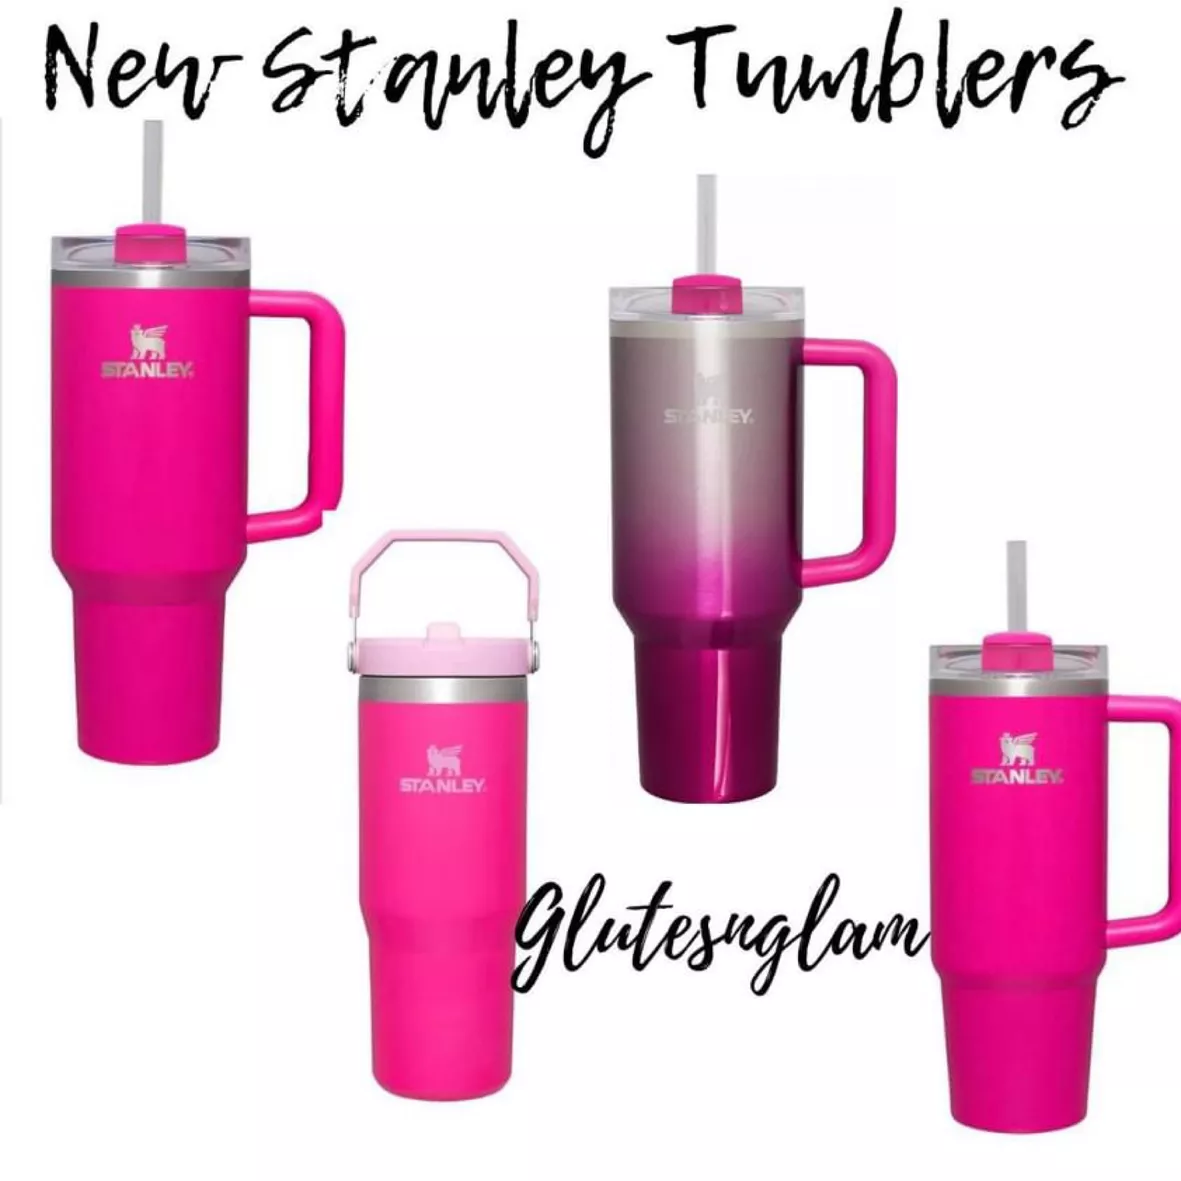 STANLEY finally listened to us, and made a hot pink tumbler! After sta, new pink stanley tumbler